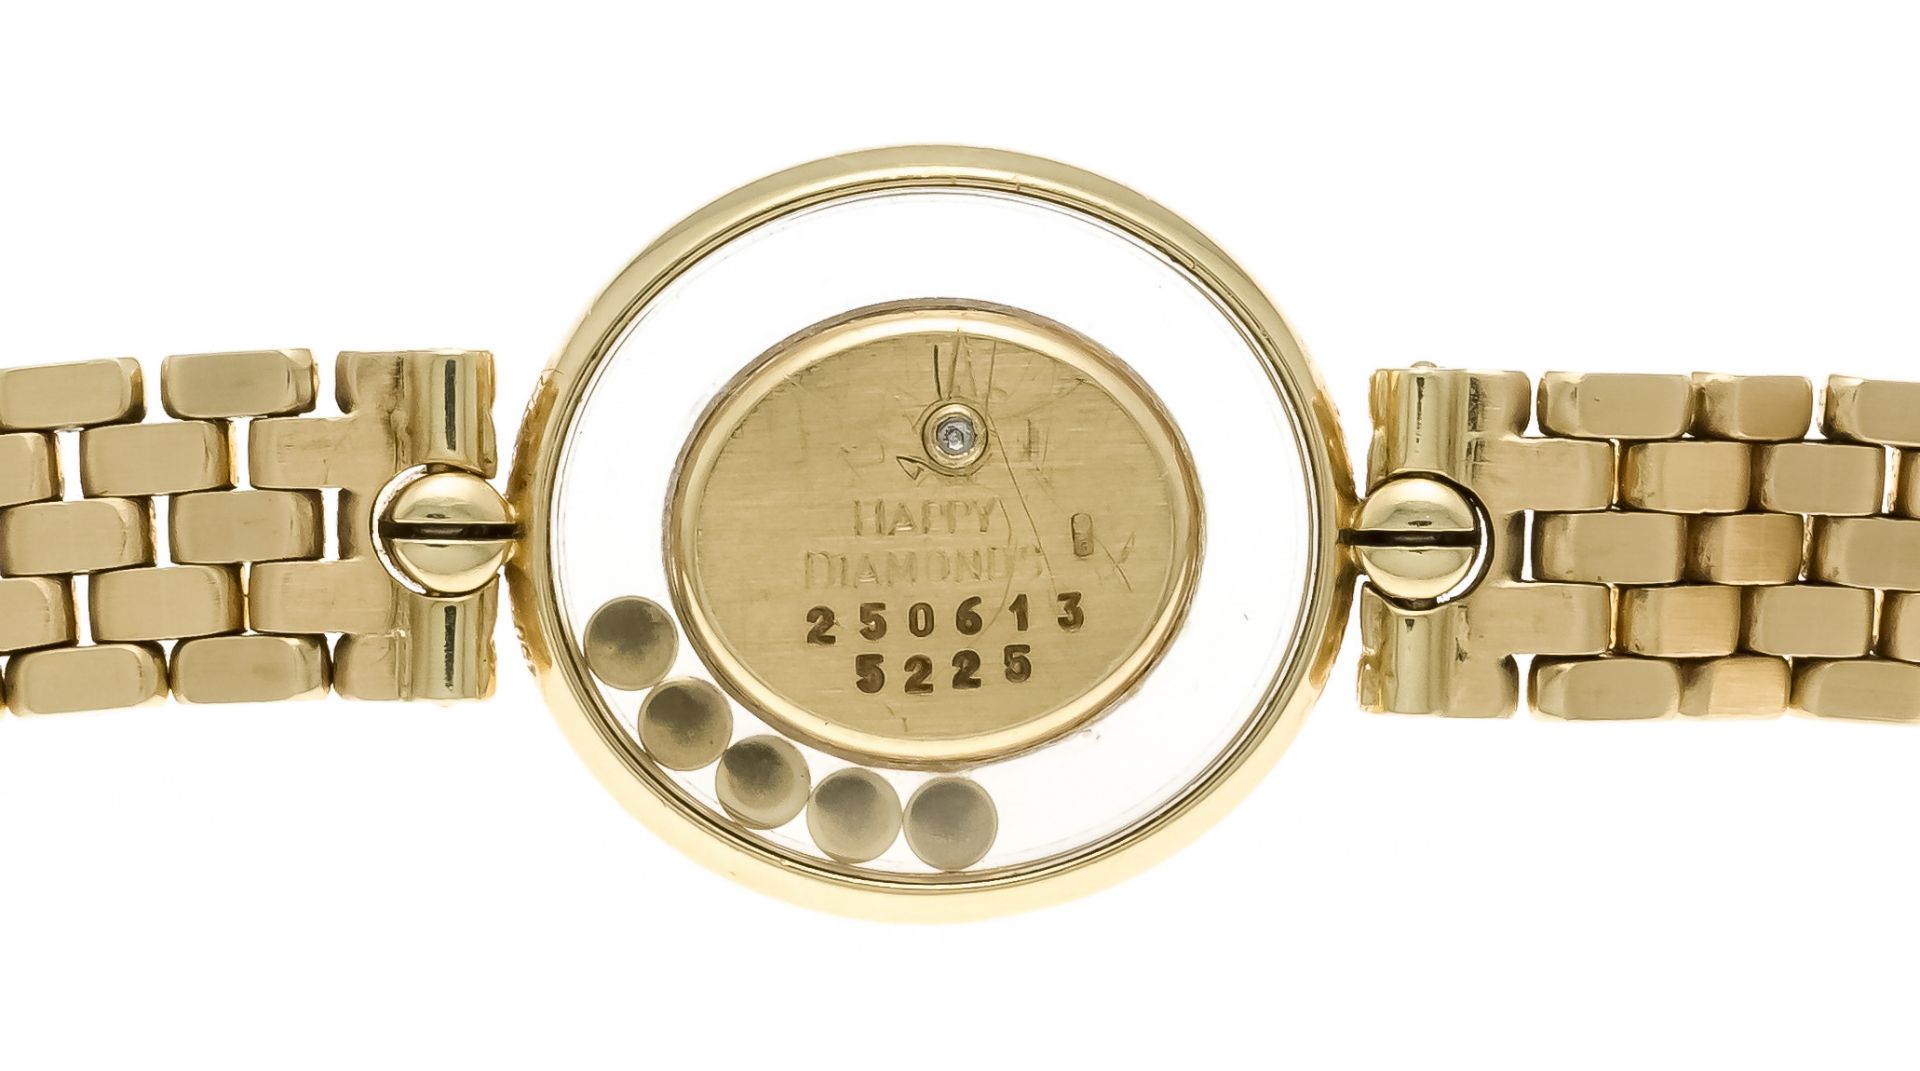 Chopard Happy Diamonds, ladies quartz watch, 750/000 GG, Ref. 5225 from 1990, polished gold case and - Image 2 of 4